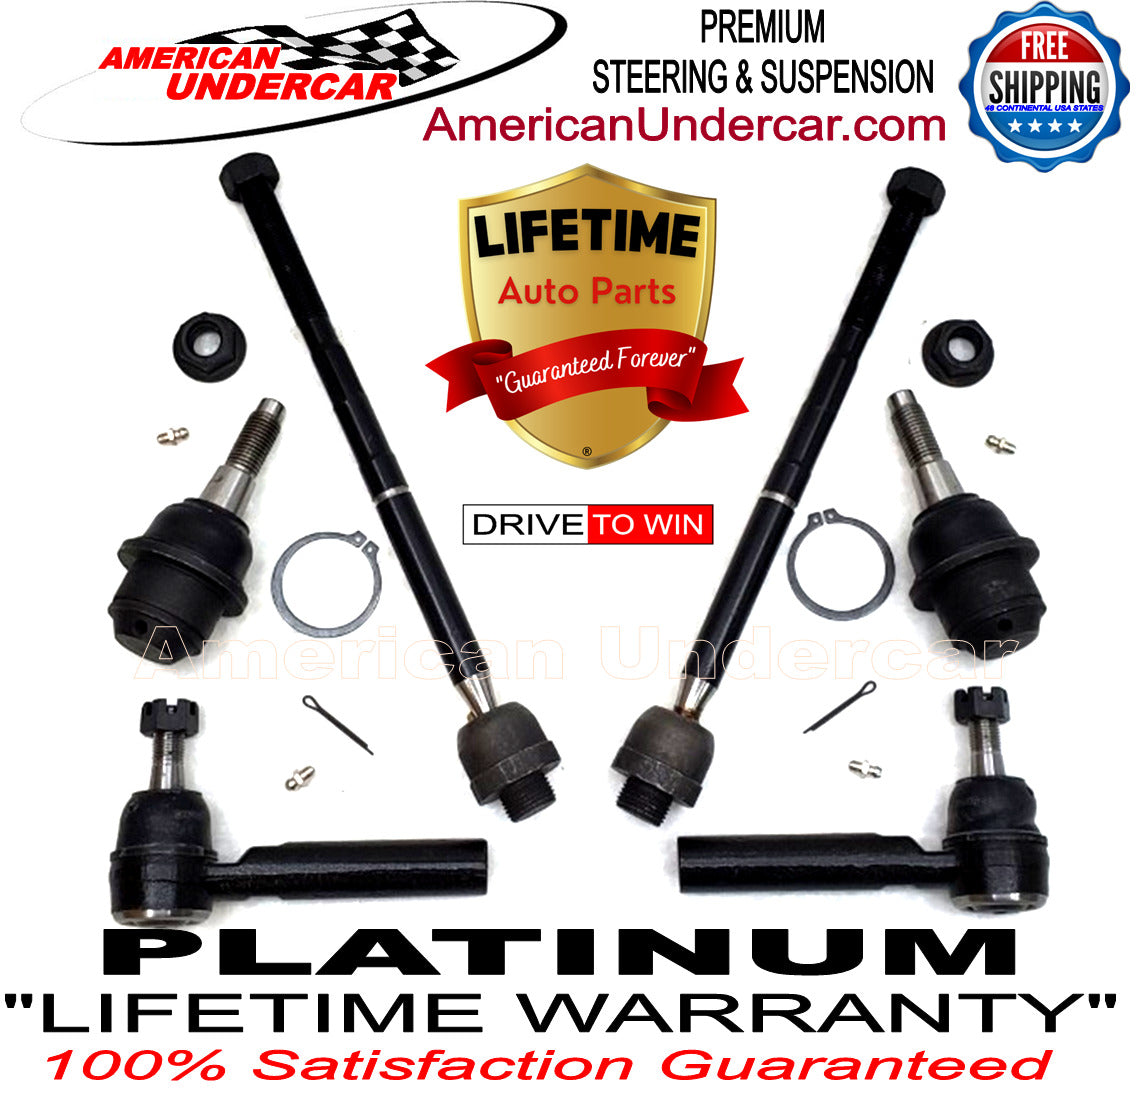 Lifetime Ball Joint and Tie Rod Steering Kit for 2007-2013 Chevrolet, GMC, Cadillac 2WD, 4x4